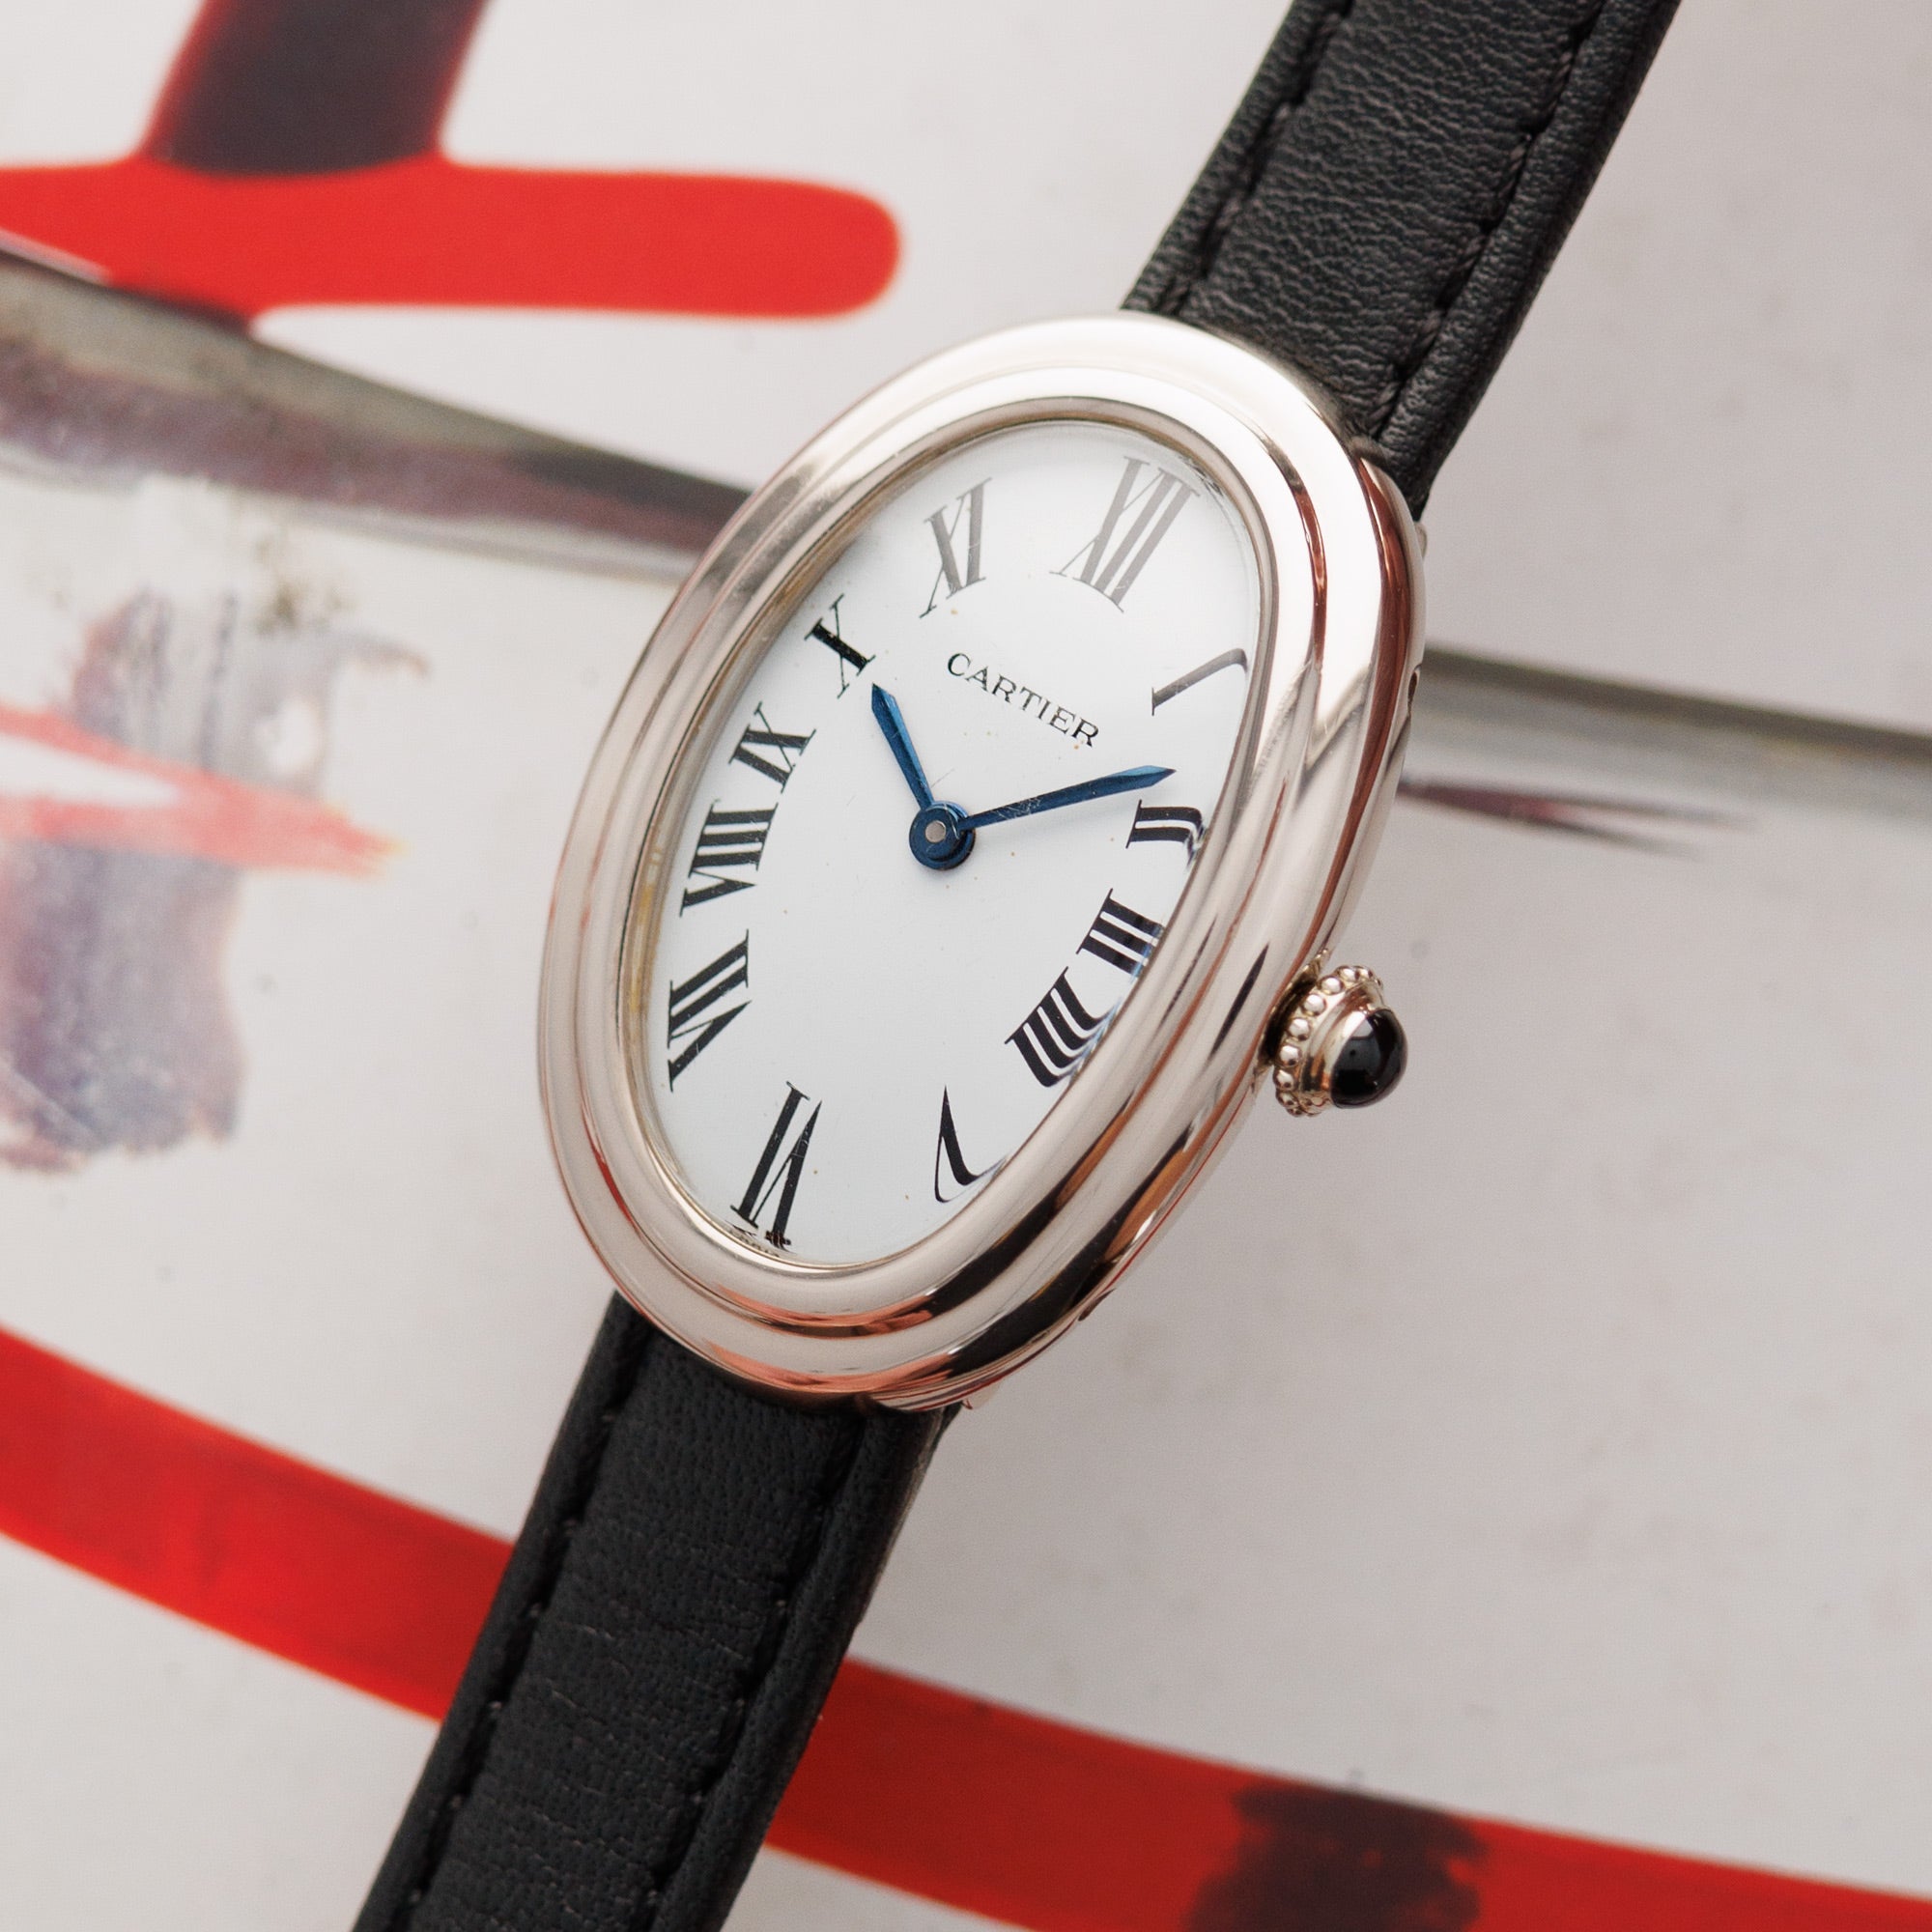 Cartier - Cartier White Gold Baignoire Watch - The Keystone Watches